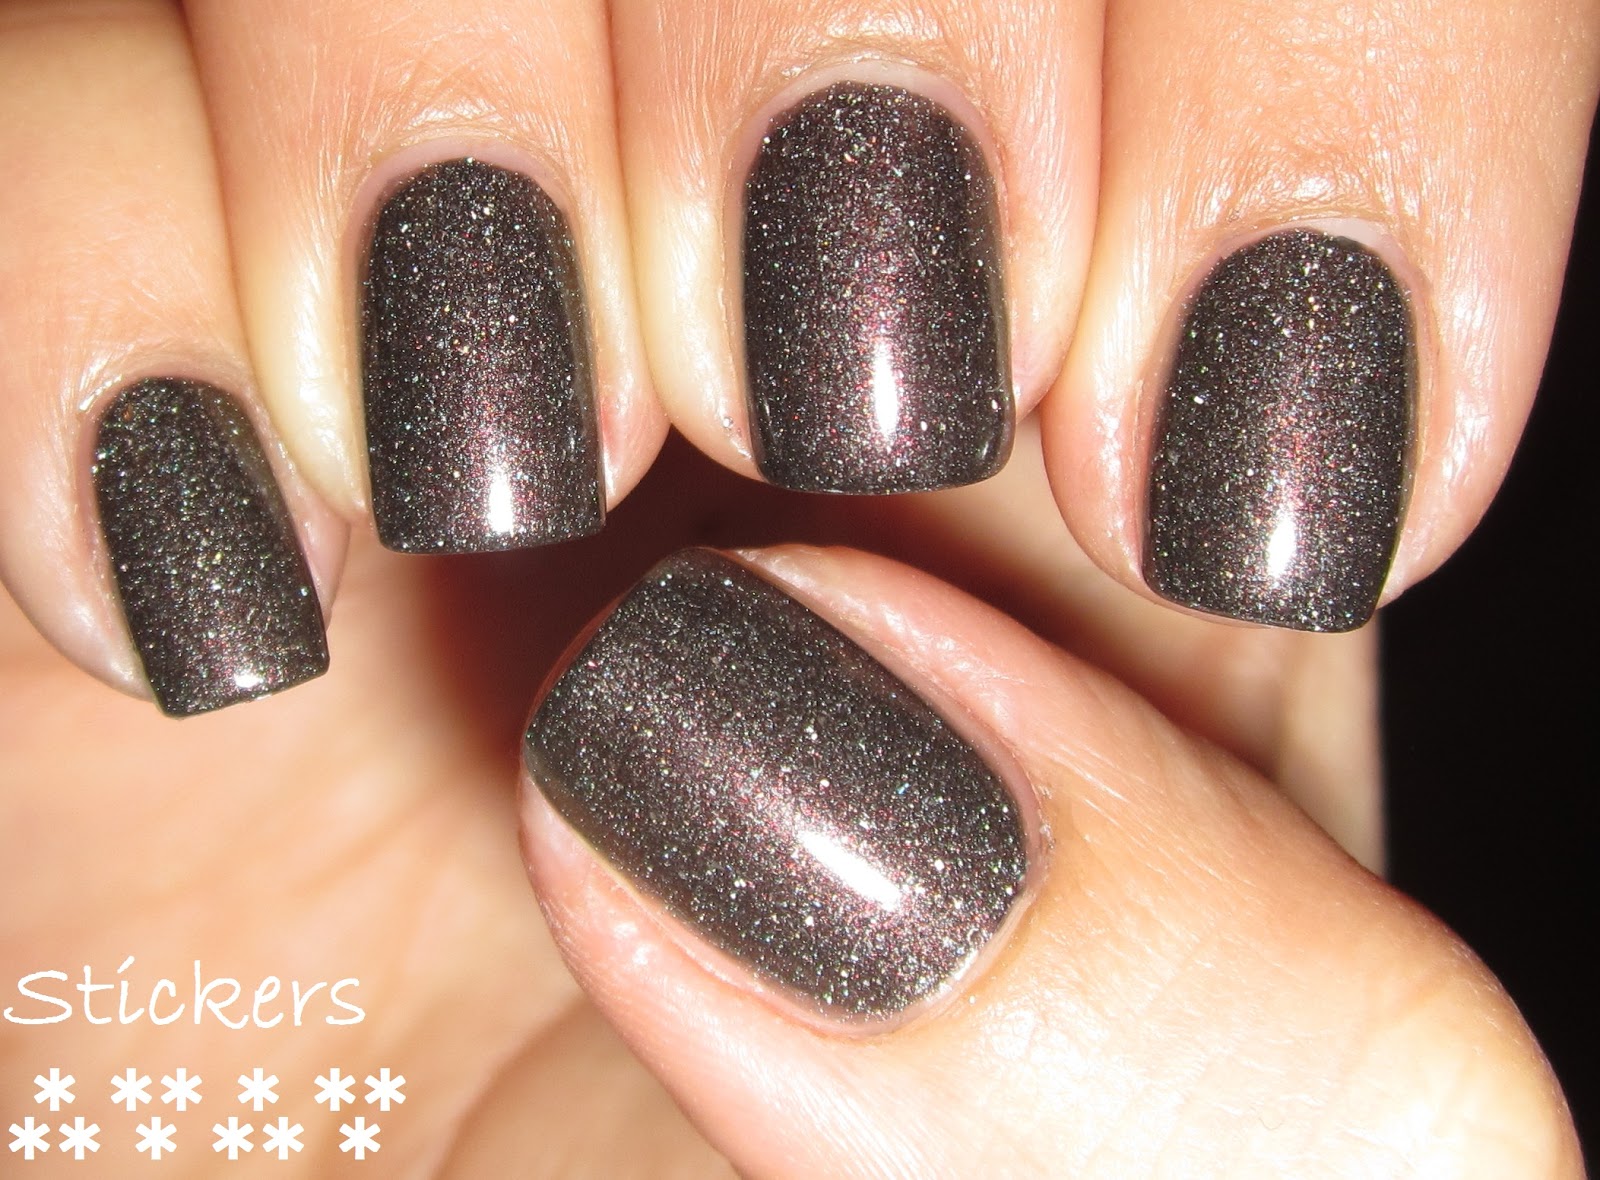 3. OPI Nail Lacquer in "My Private Jet" - wide 2